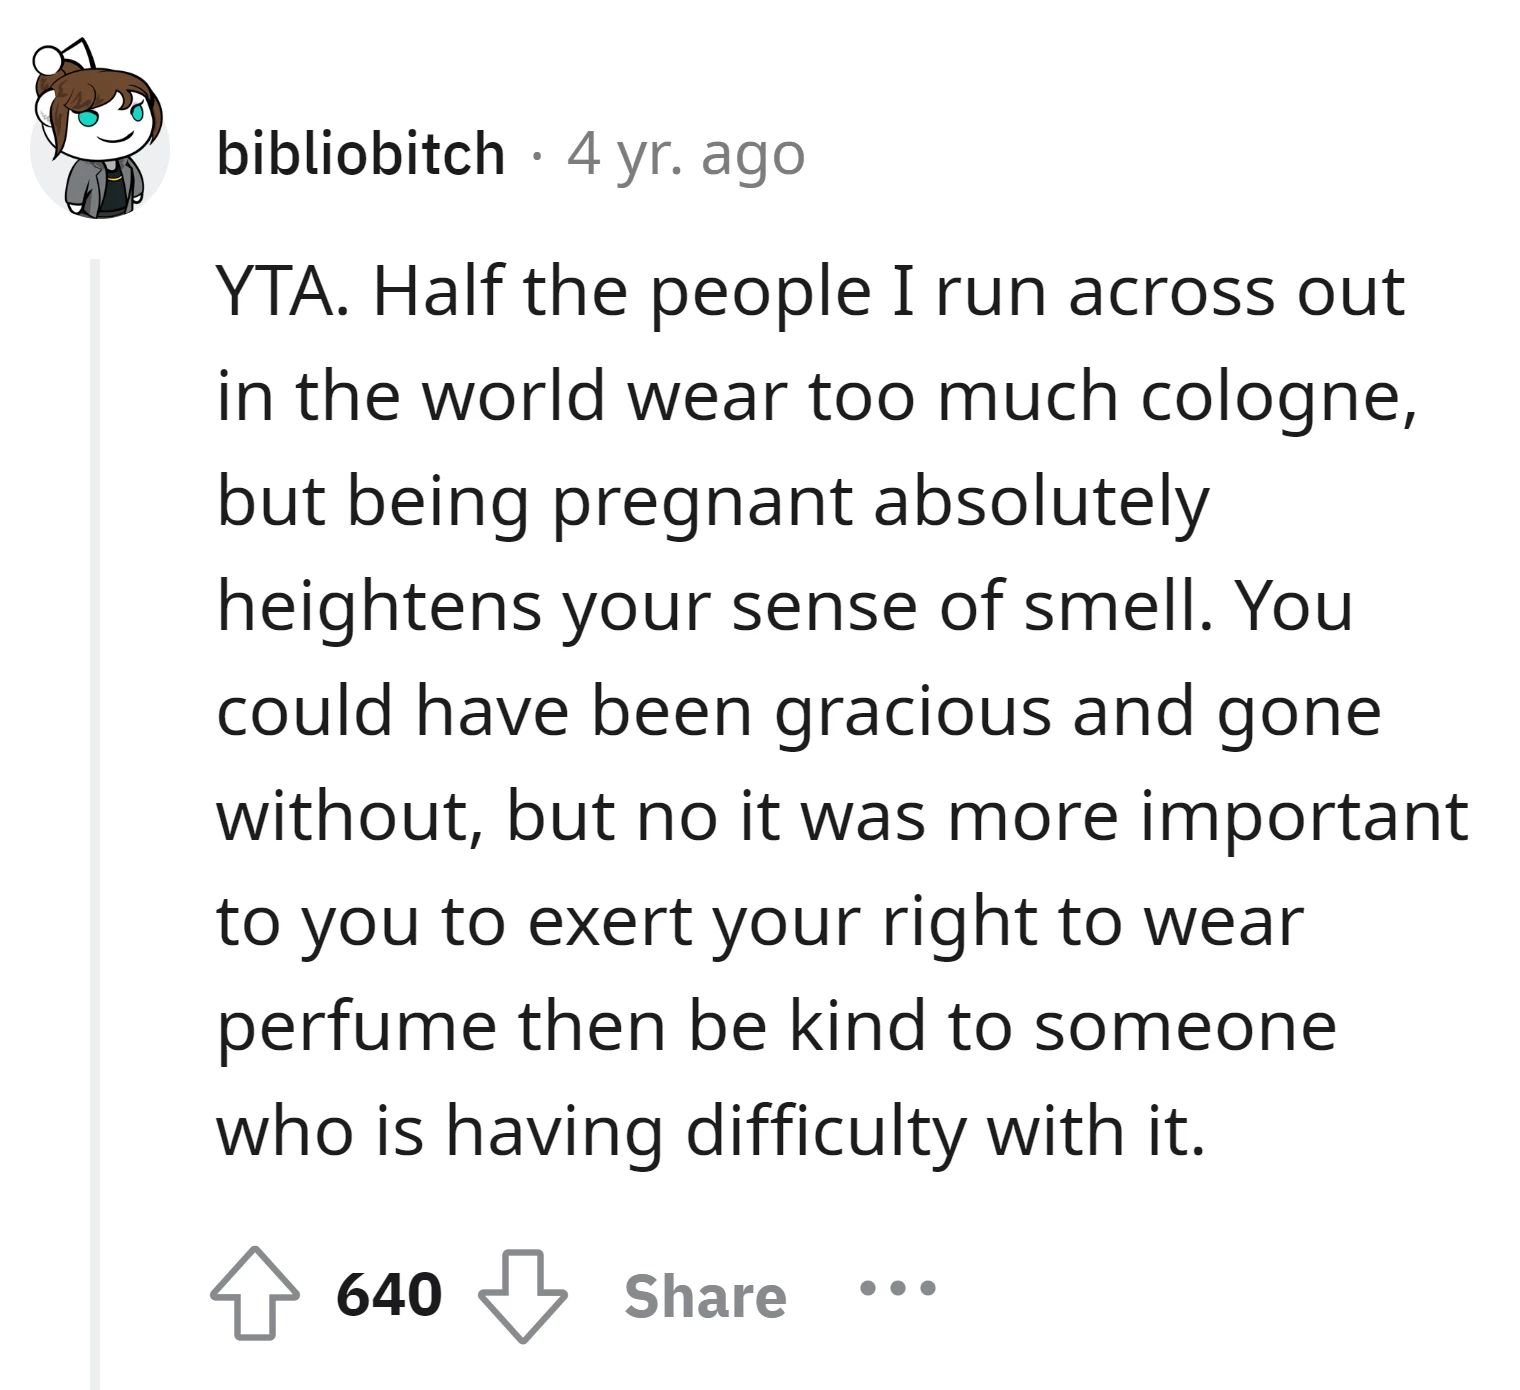 The OP could have been more gracious by going without cologne